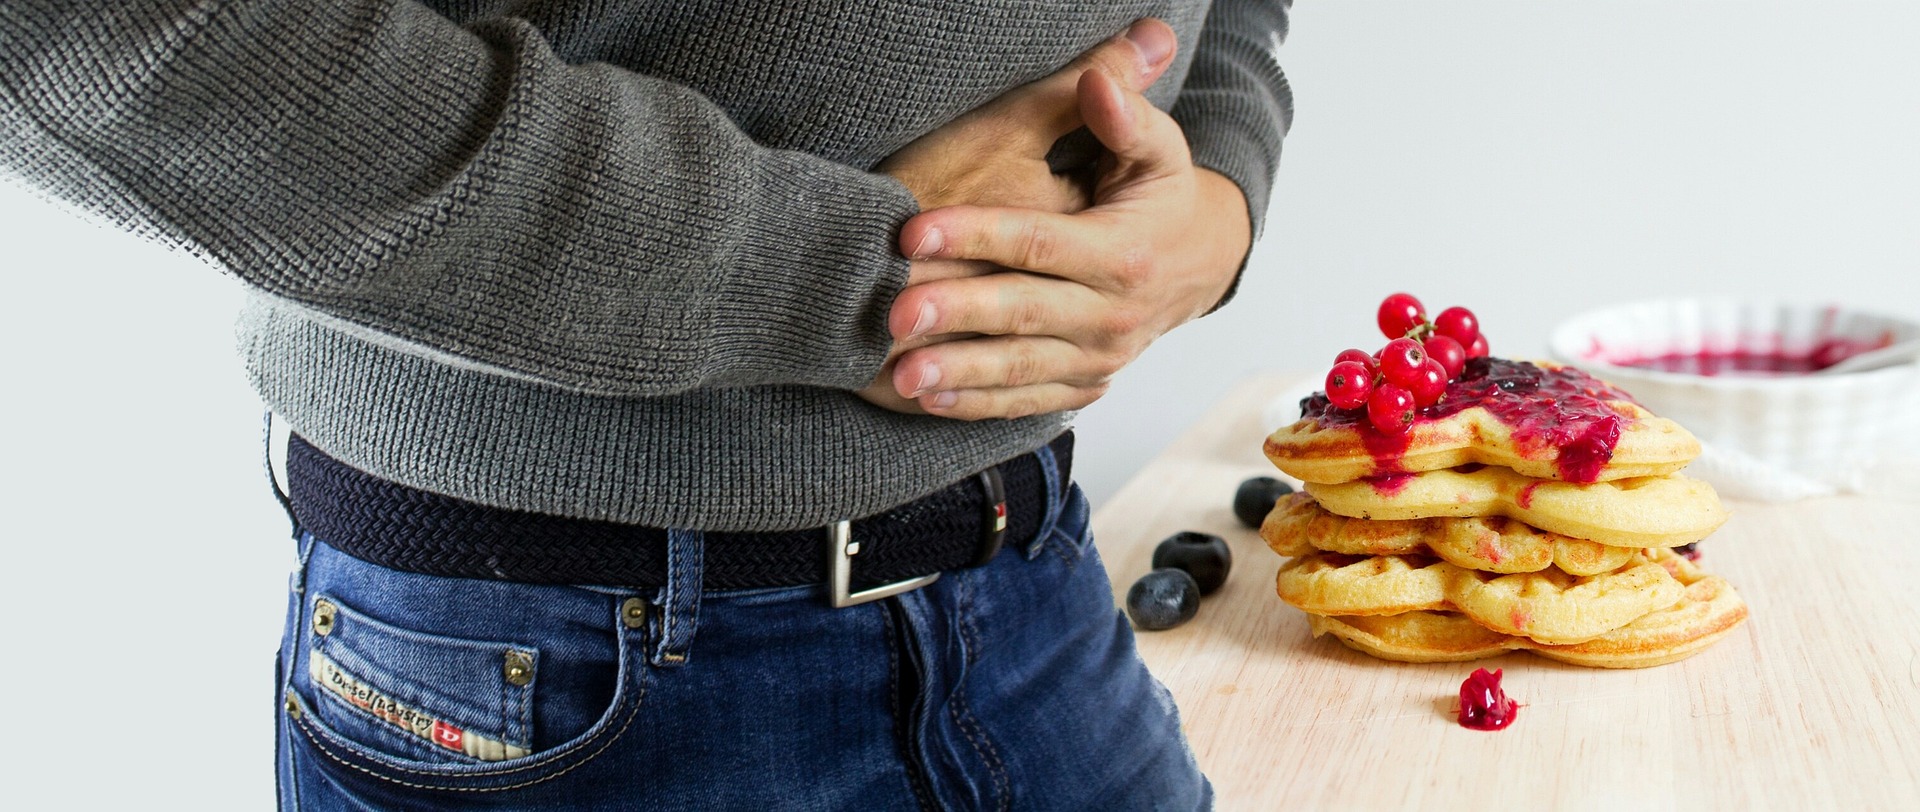 Food Poisoning: What Is, Food Sources, How To Treat, Causes, and More